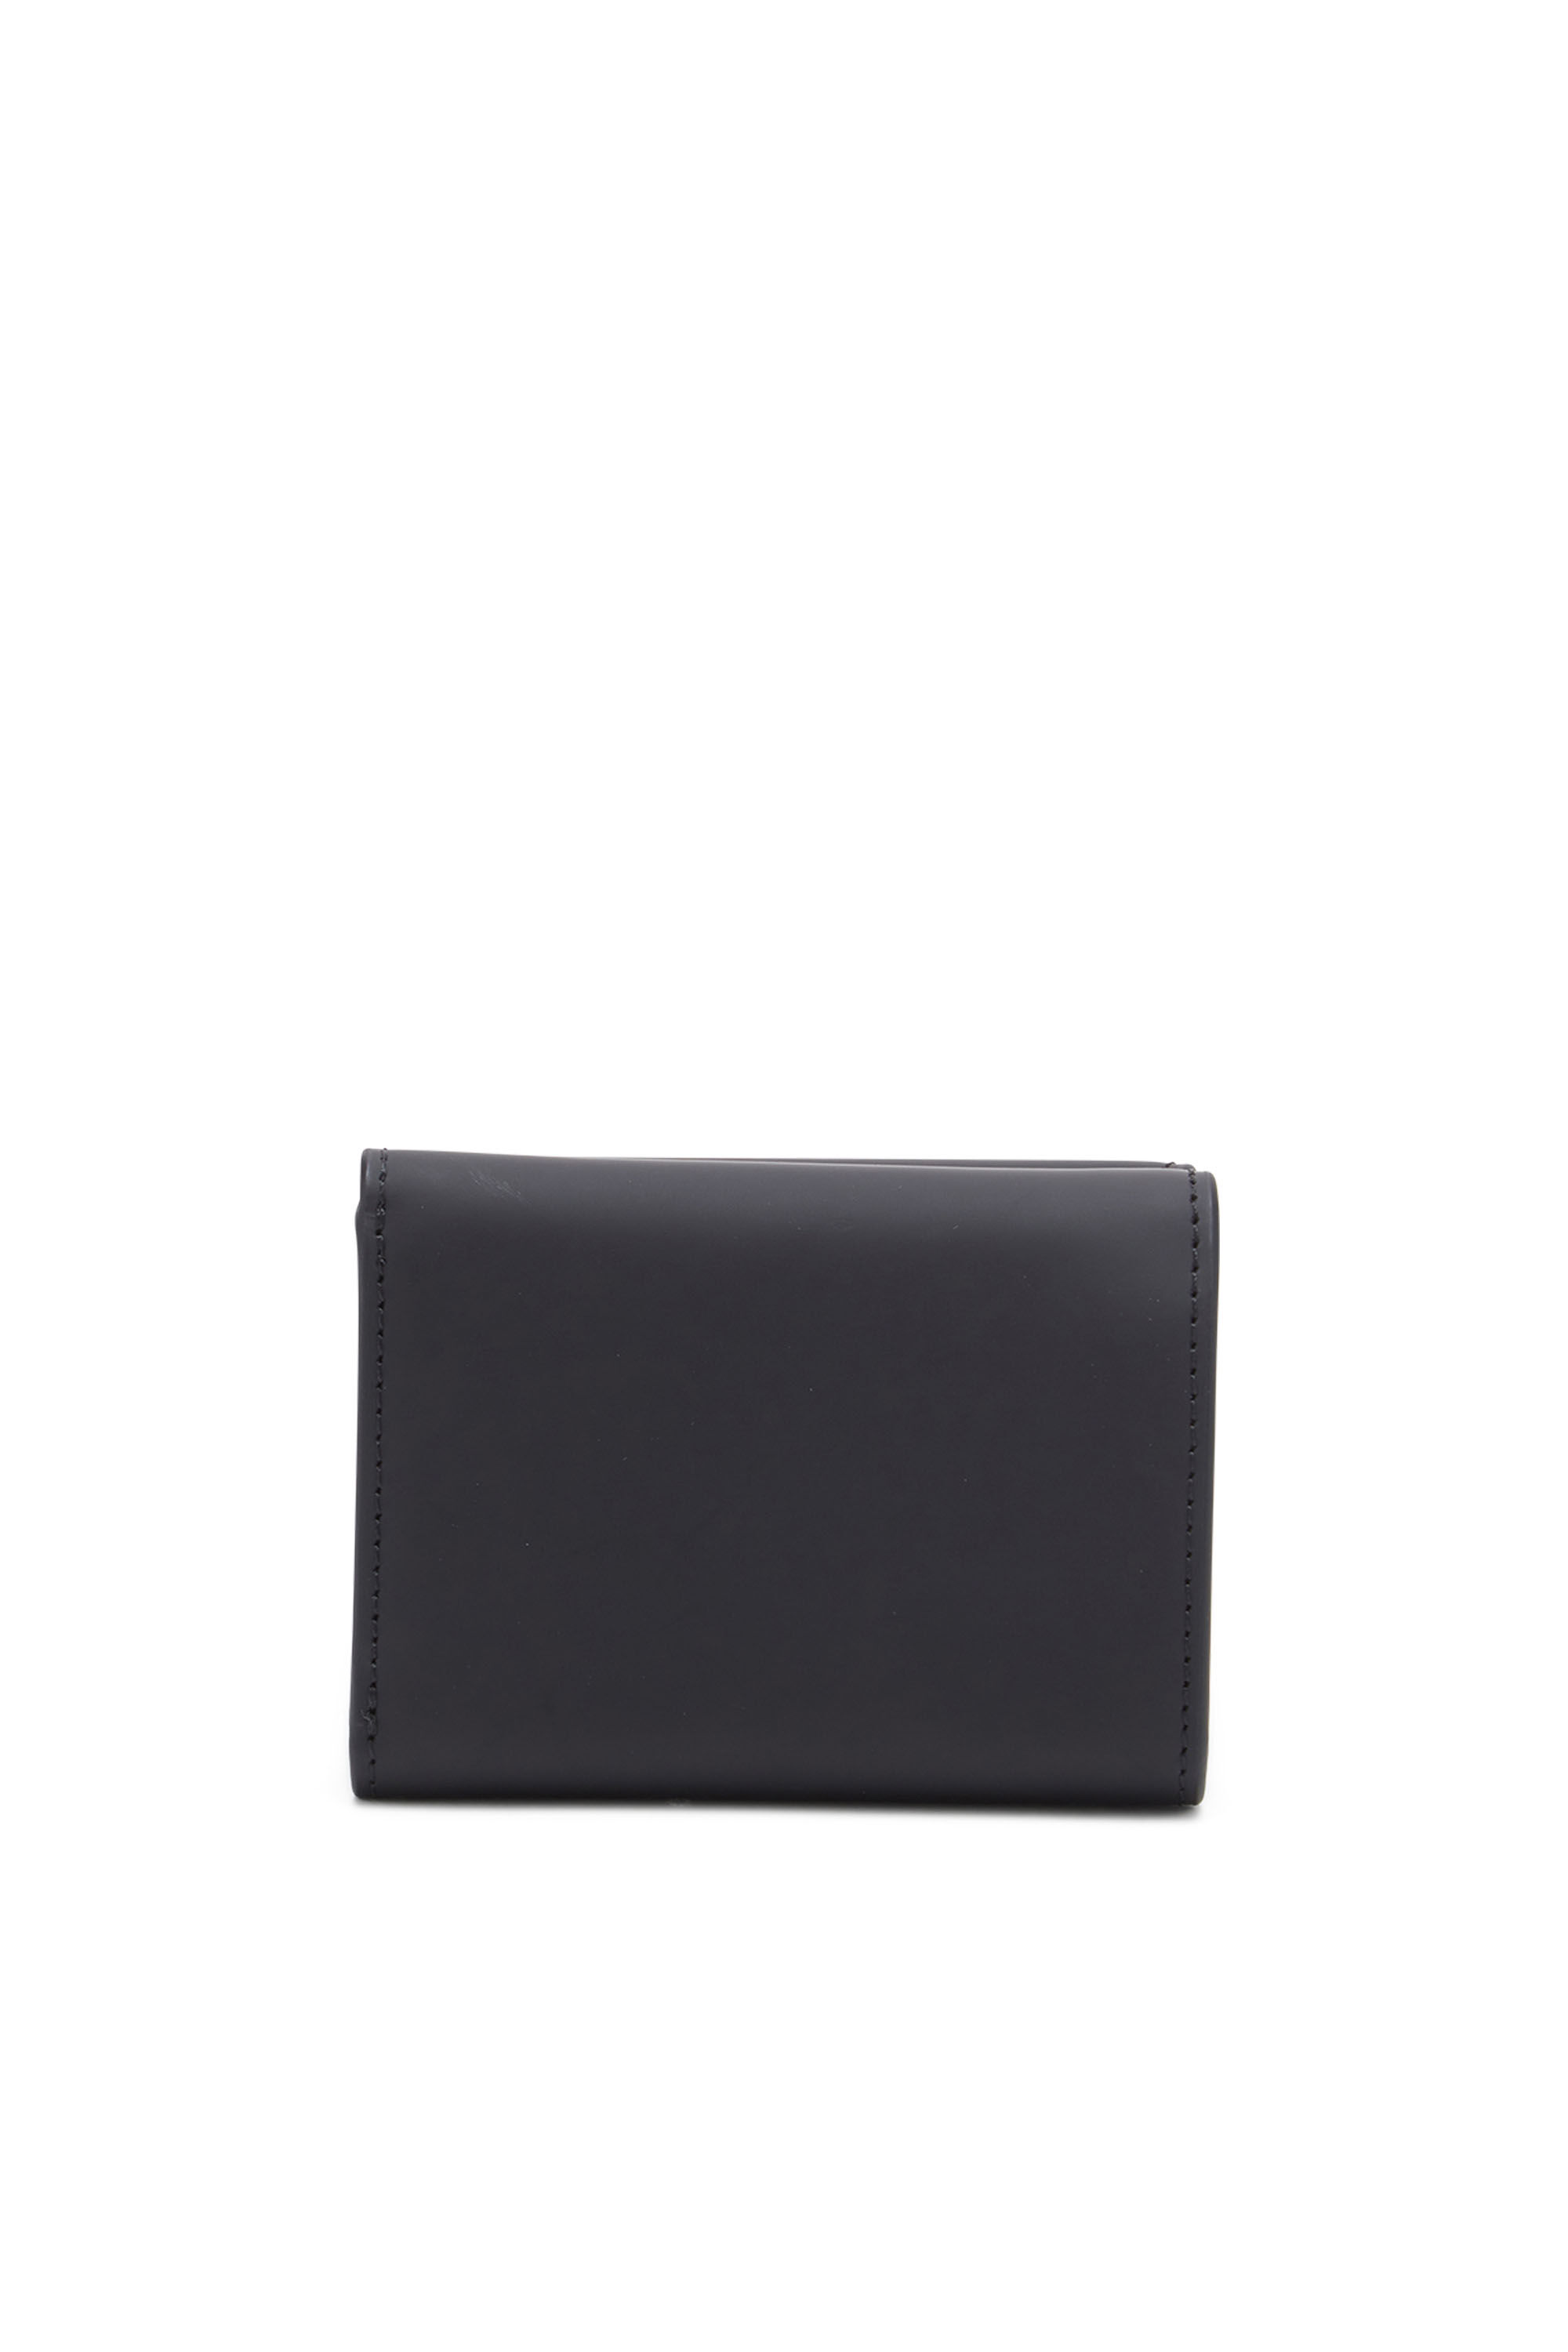 1DR TRI FOLD COIN XS II Tri-fold wallet in matte leather｜ブラック